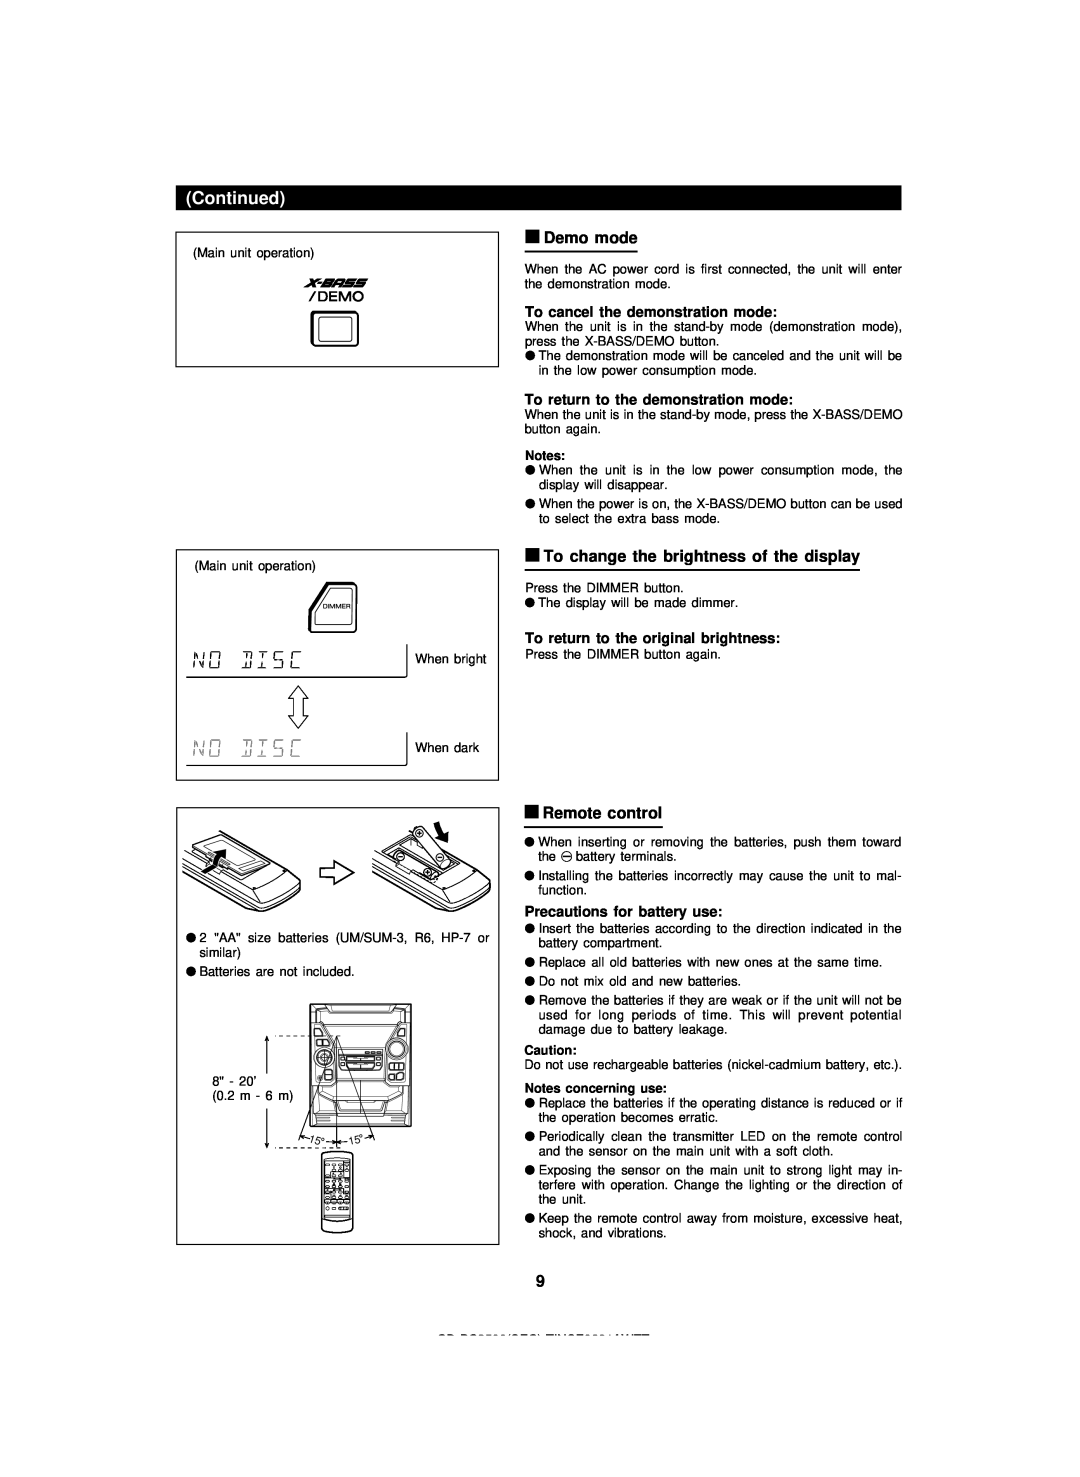 Sharp CDPC3500 operation manual Continued, To cancel the demonstration mode, To return to the demonstration mode 